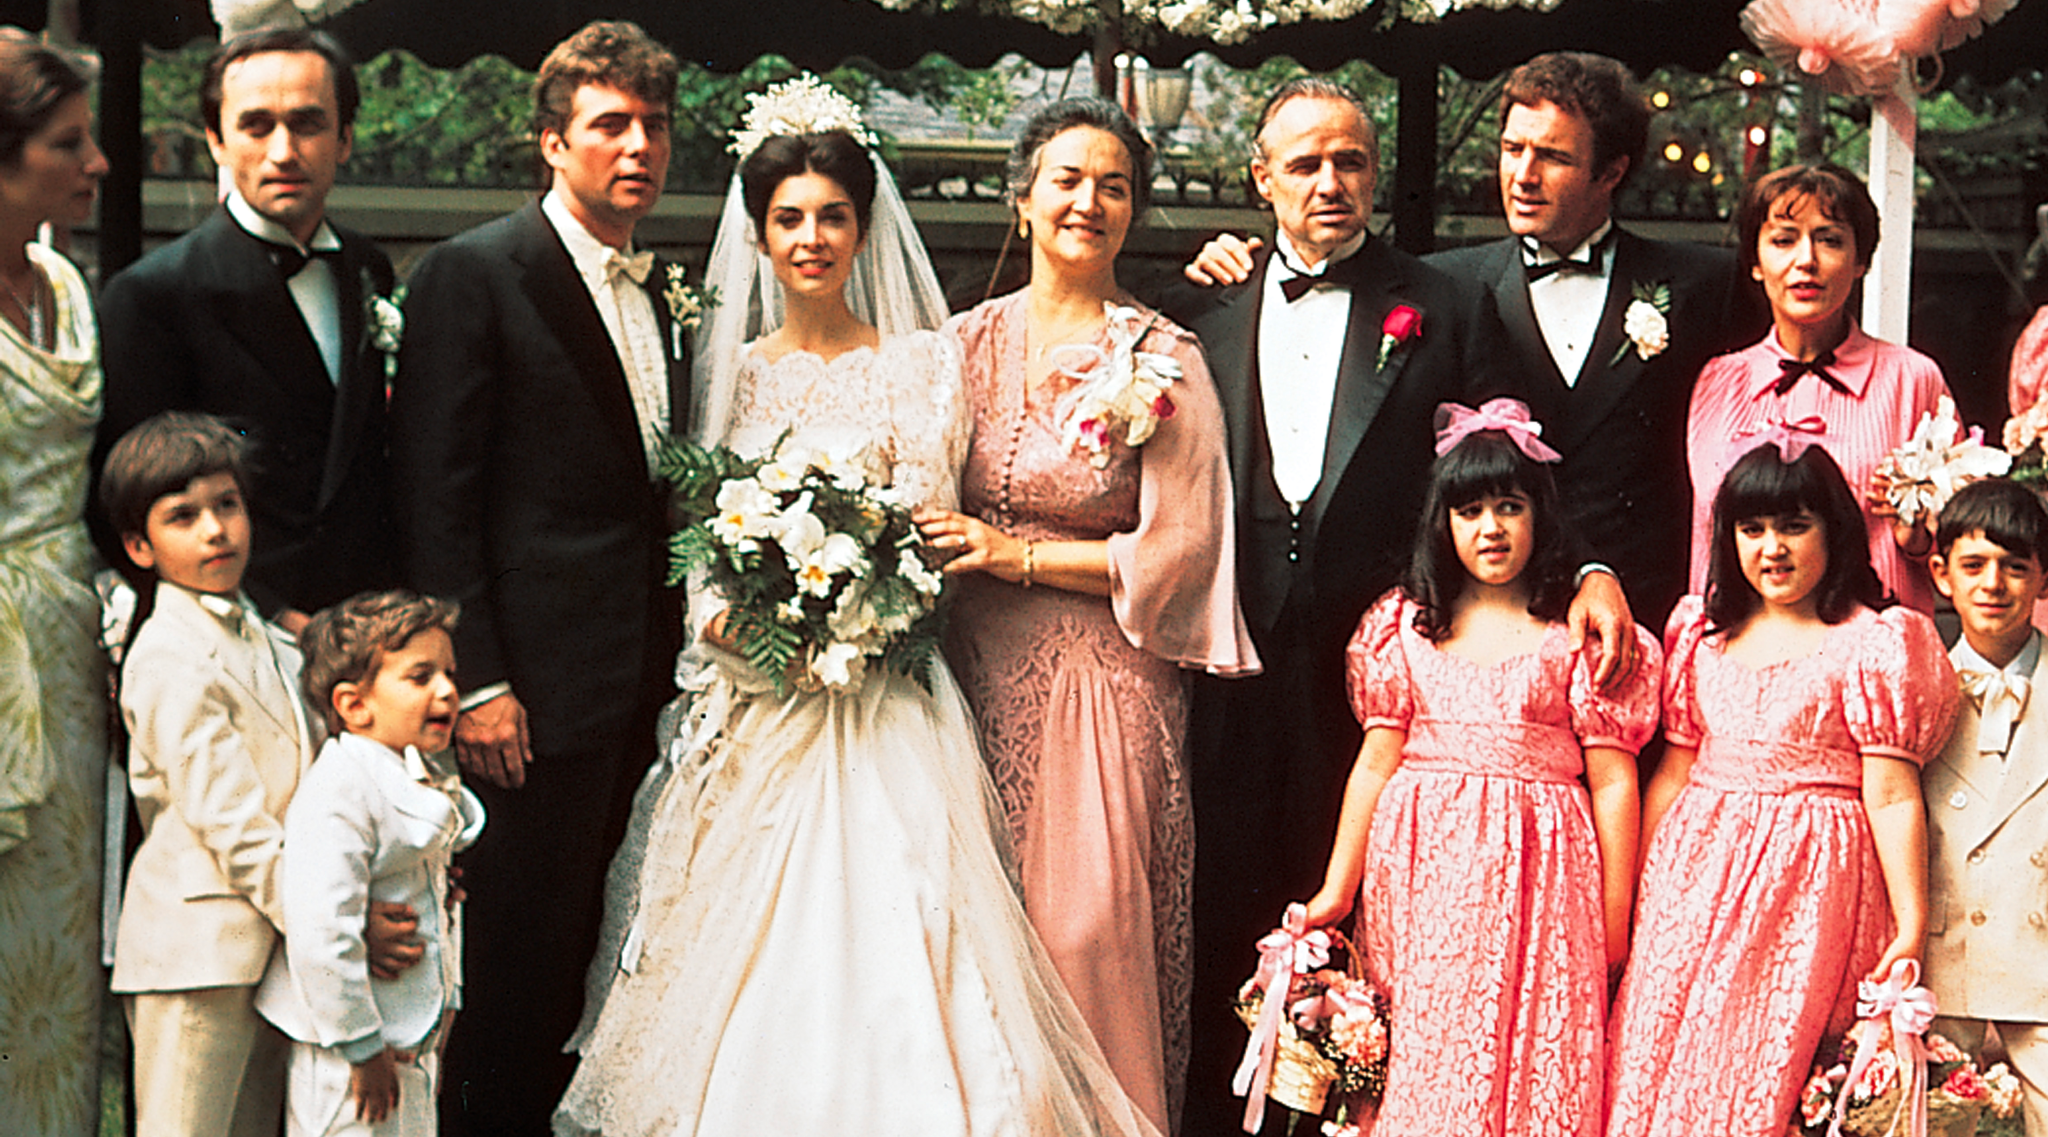 Celebrate 'The Godfather's 50th Anniversary With These Fun Facts 